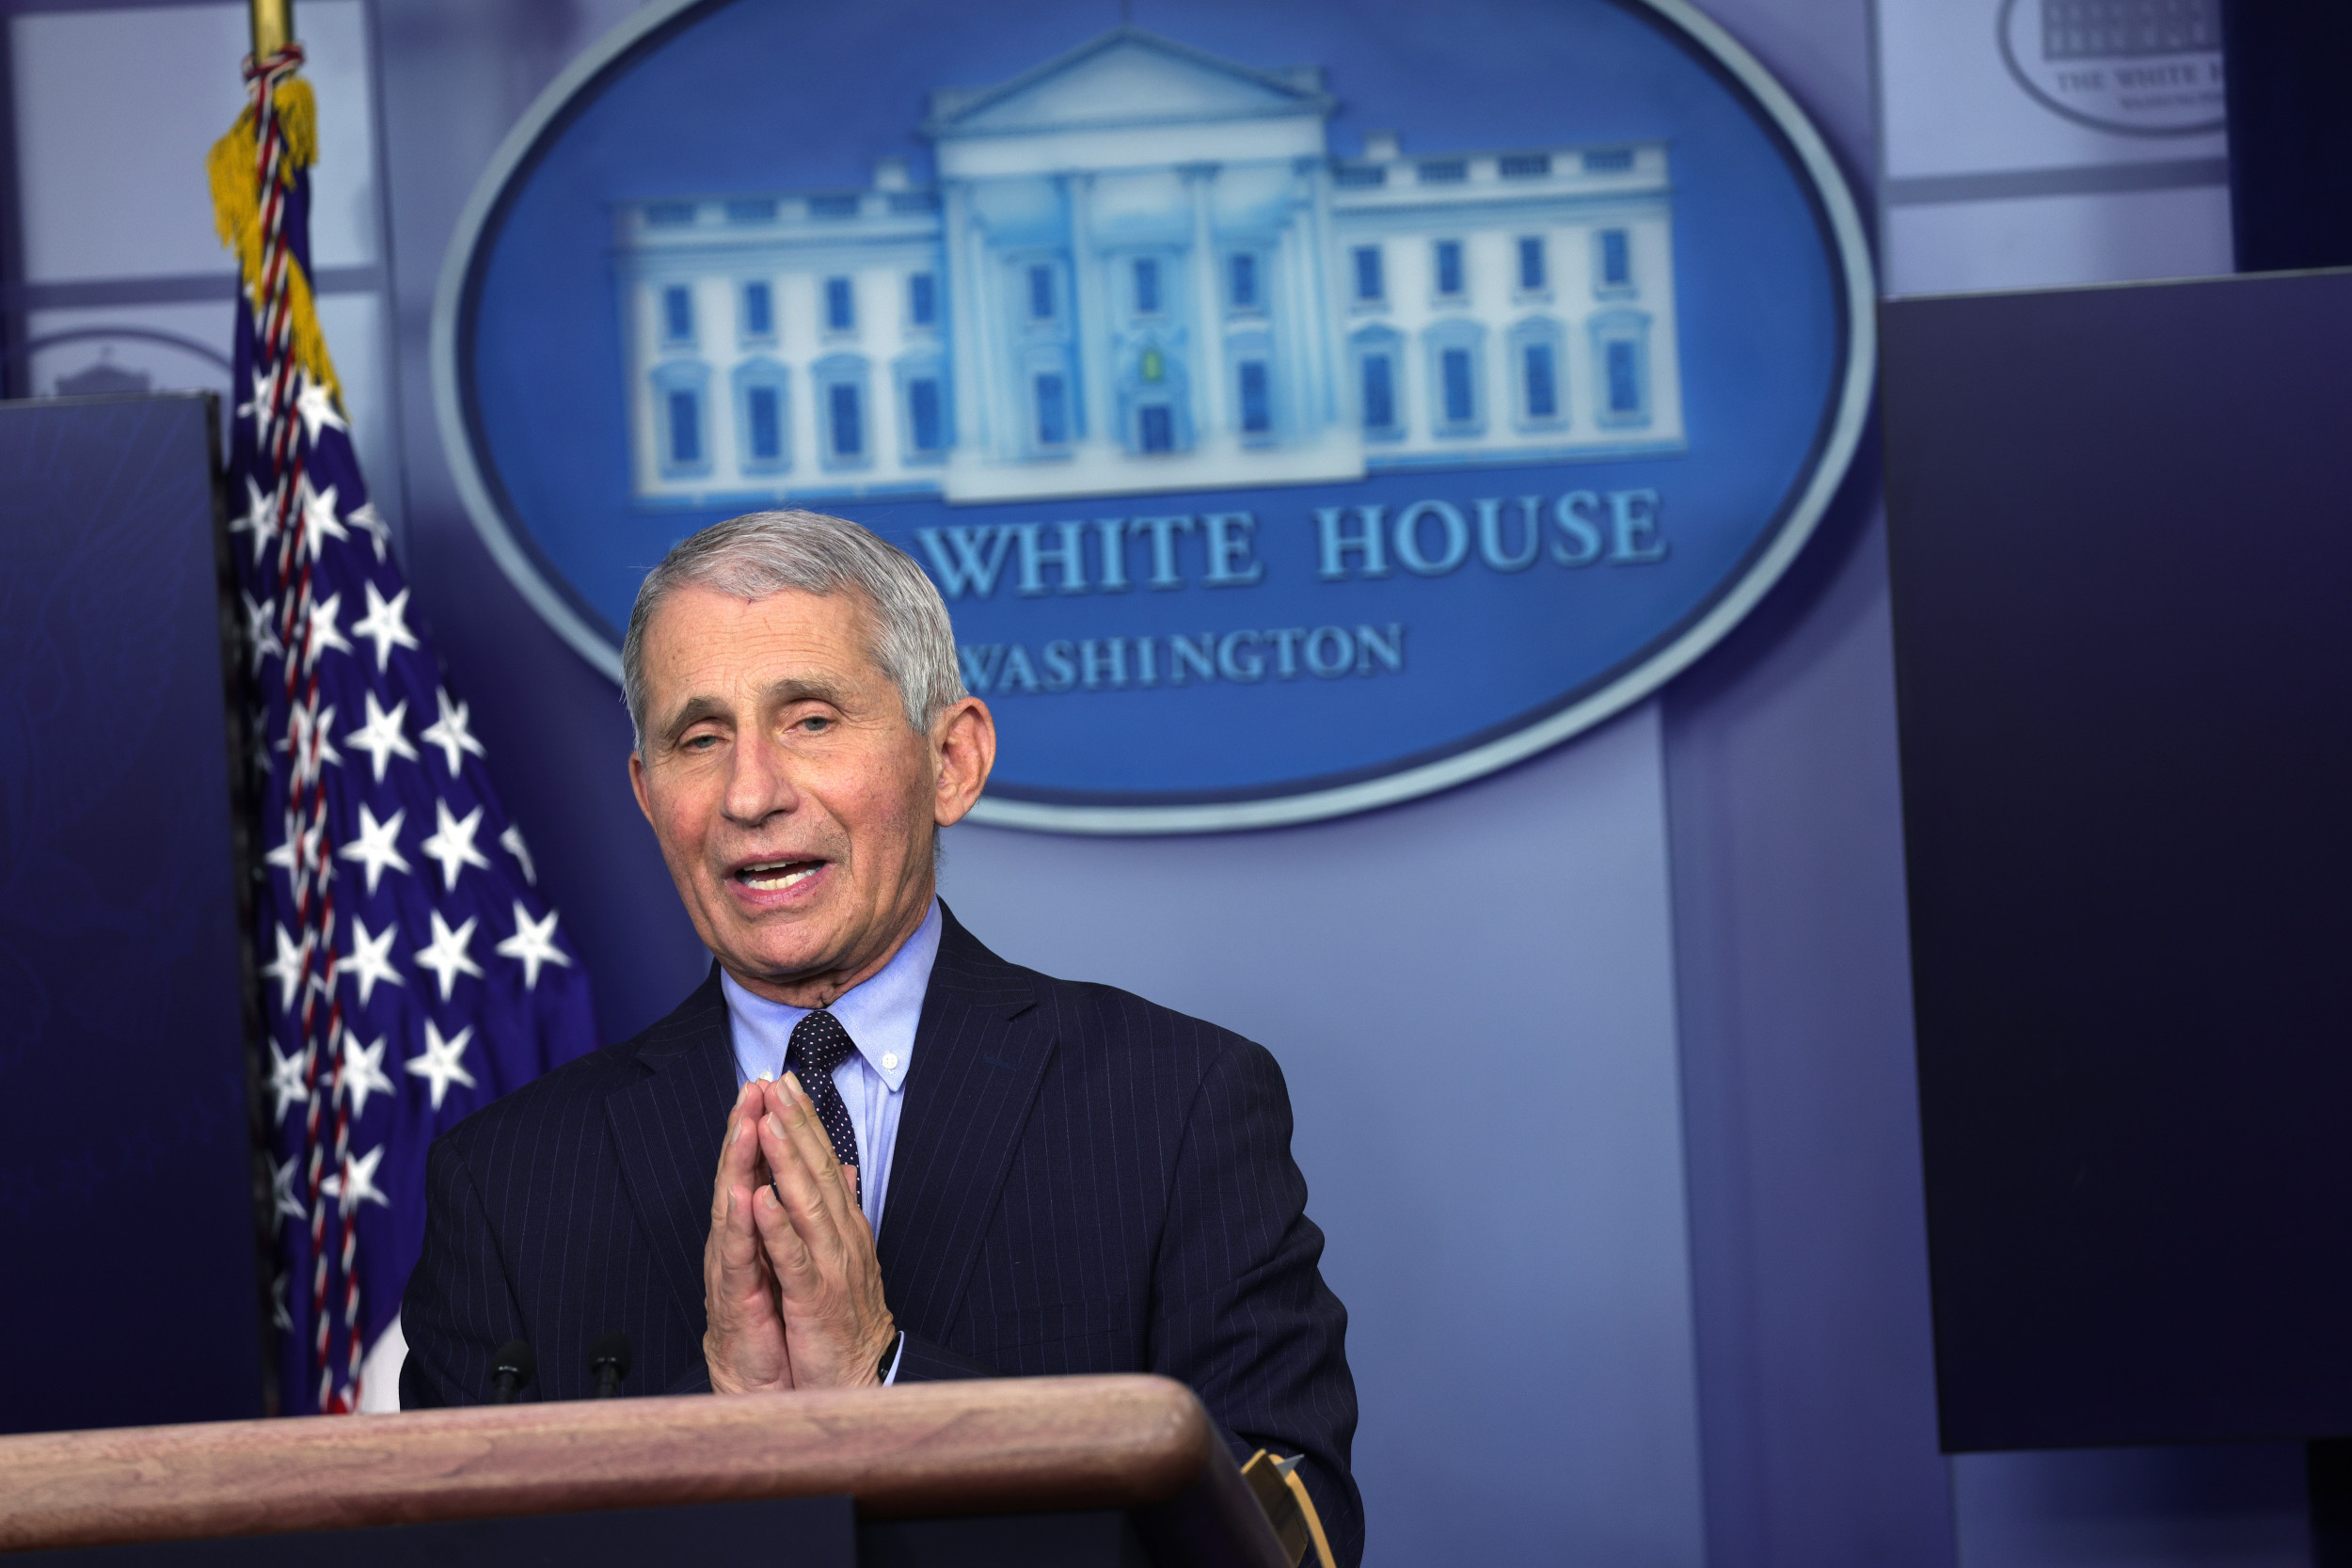 Anthony Fauci says Trump tried to lure him to minimize COVID pandemic: ‘Be more positive’